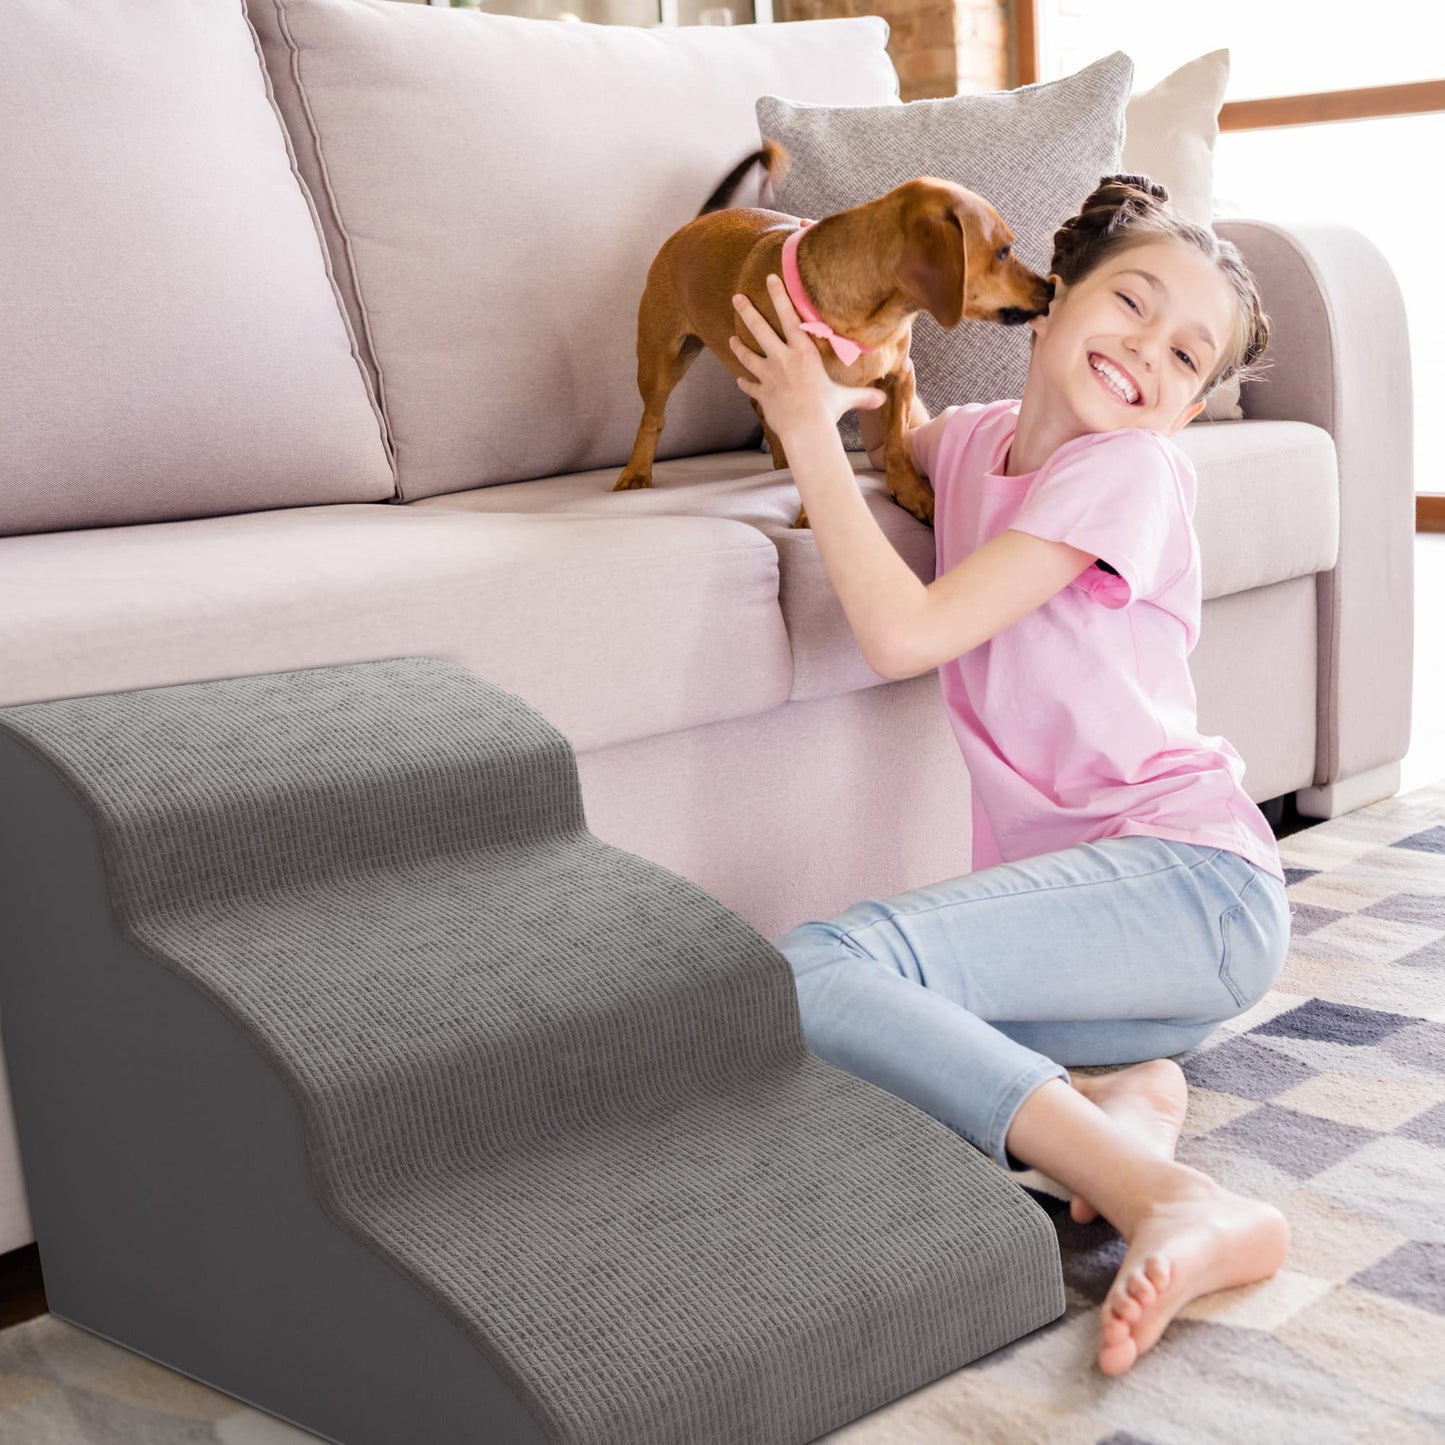 Sturdy Dog Stairs and Ramp for Beds Or Couches by ZICOTO - Durable Easy to Walk on Steps 15.7" high for Small Dogs and Cats - Allows Your Pets Easy Access to Your Sofa or Bedside Up to 22" High